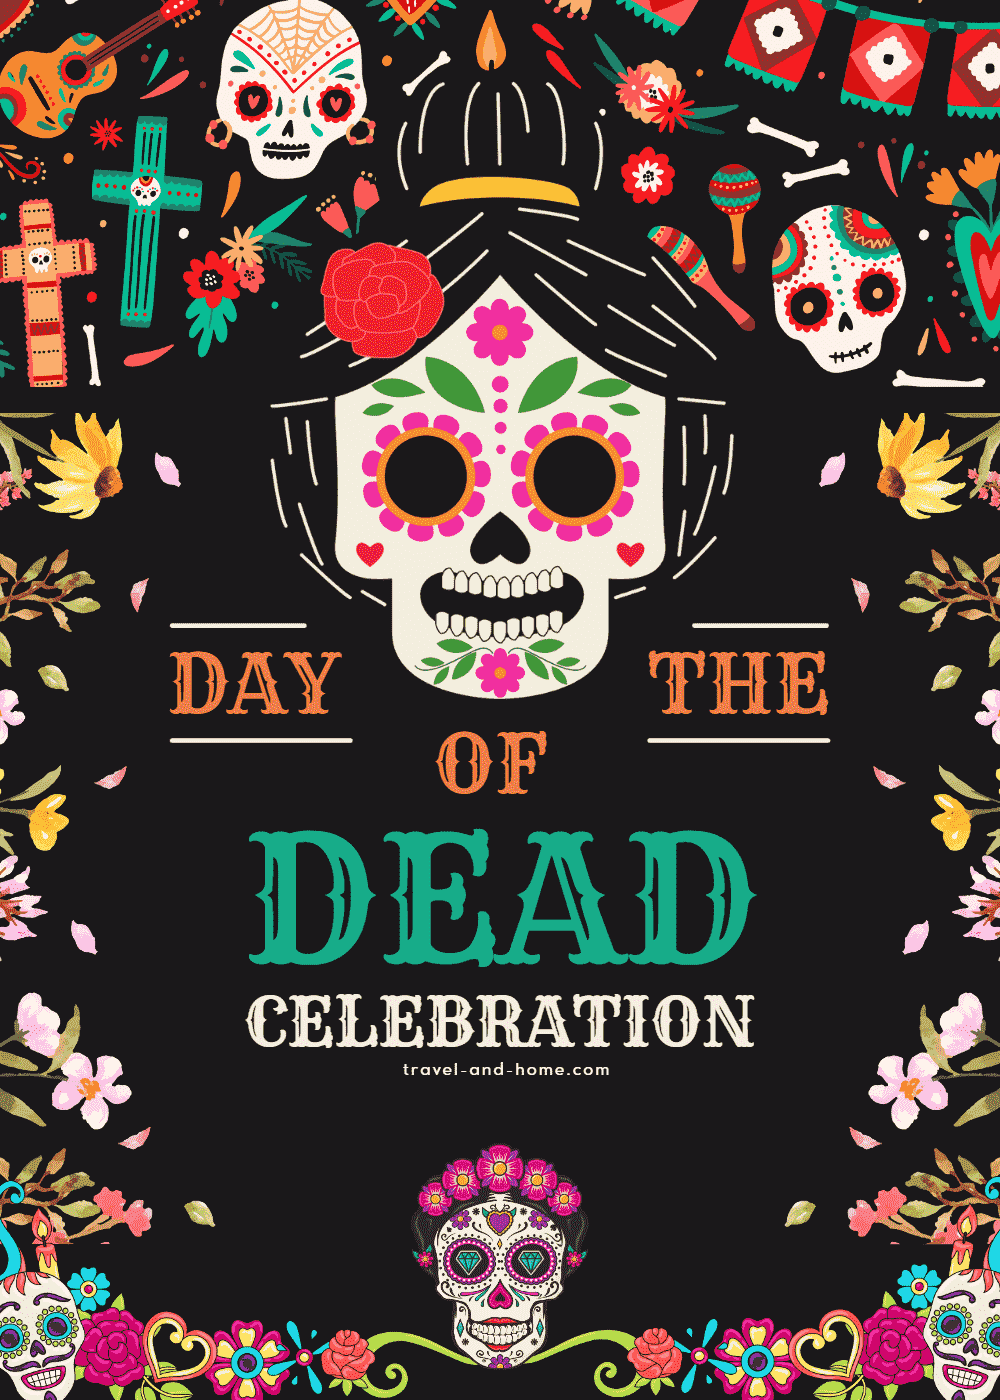 Day of the Dead Culture traditions in the world mexico hungary min min